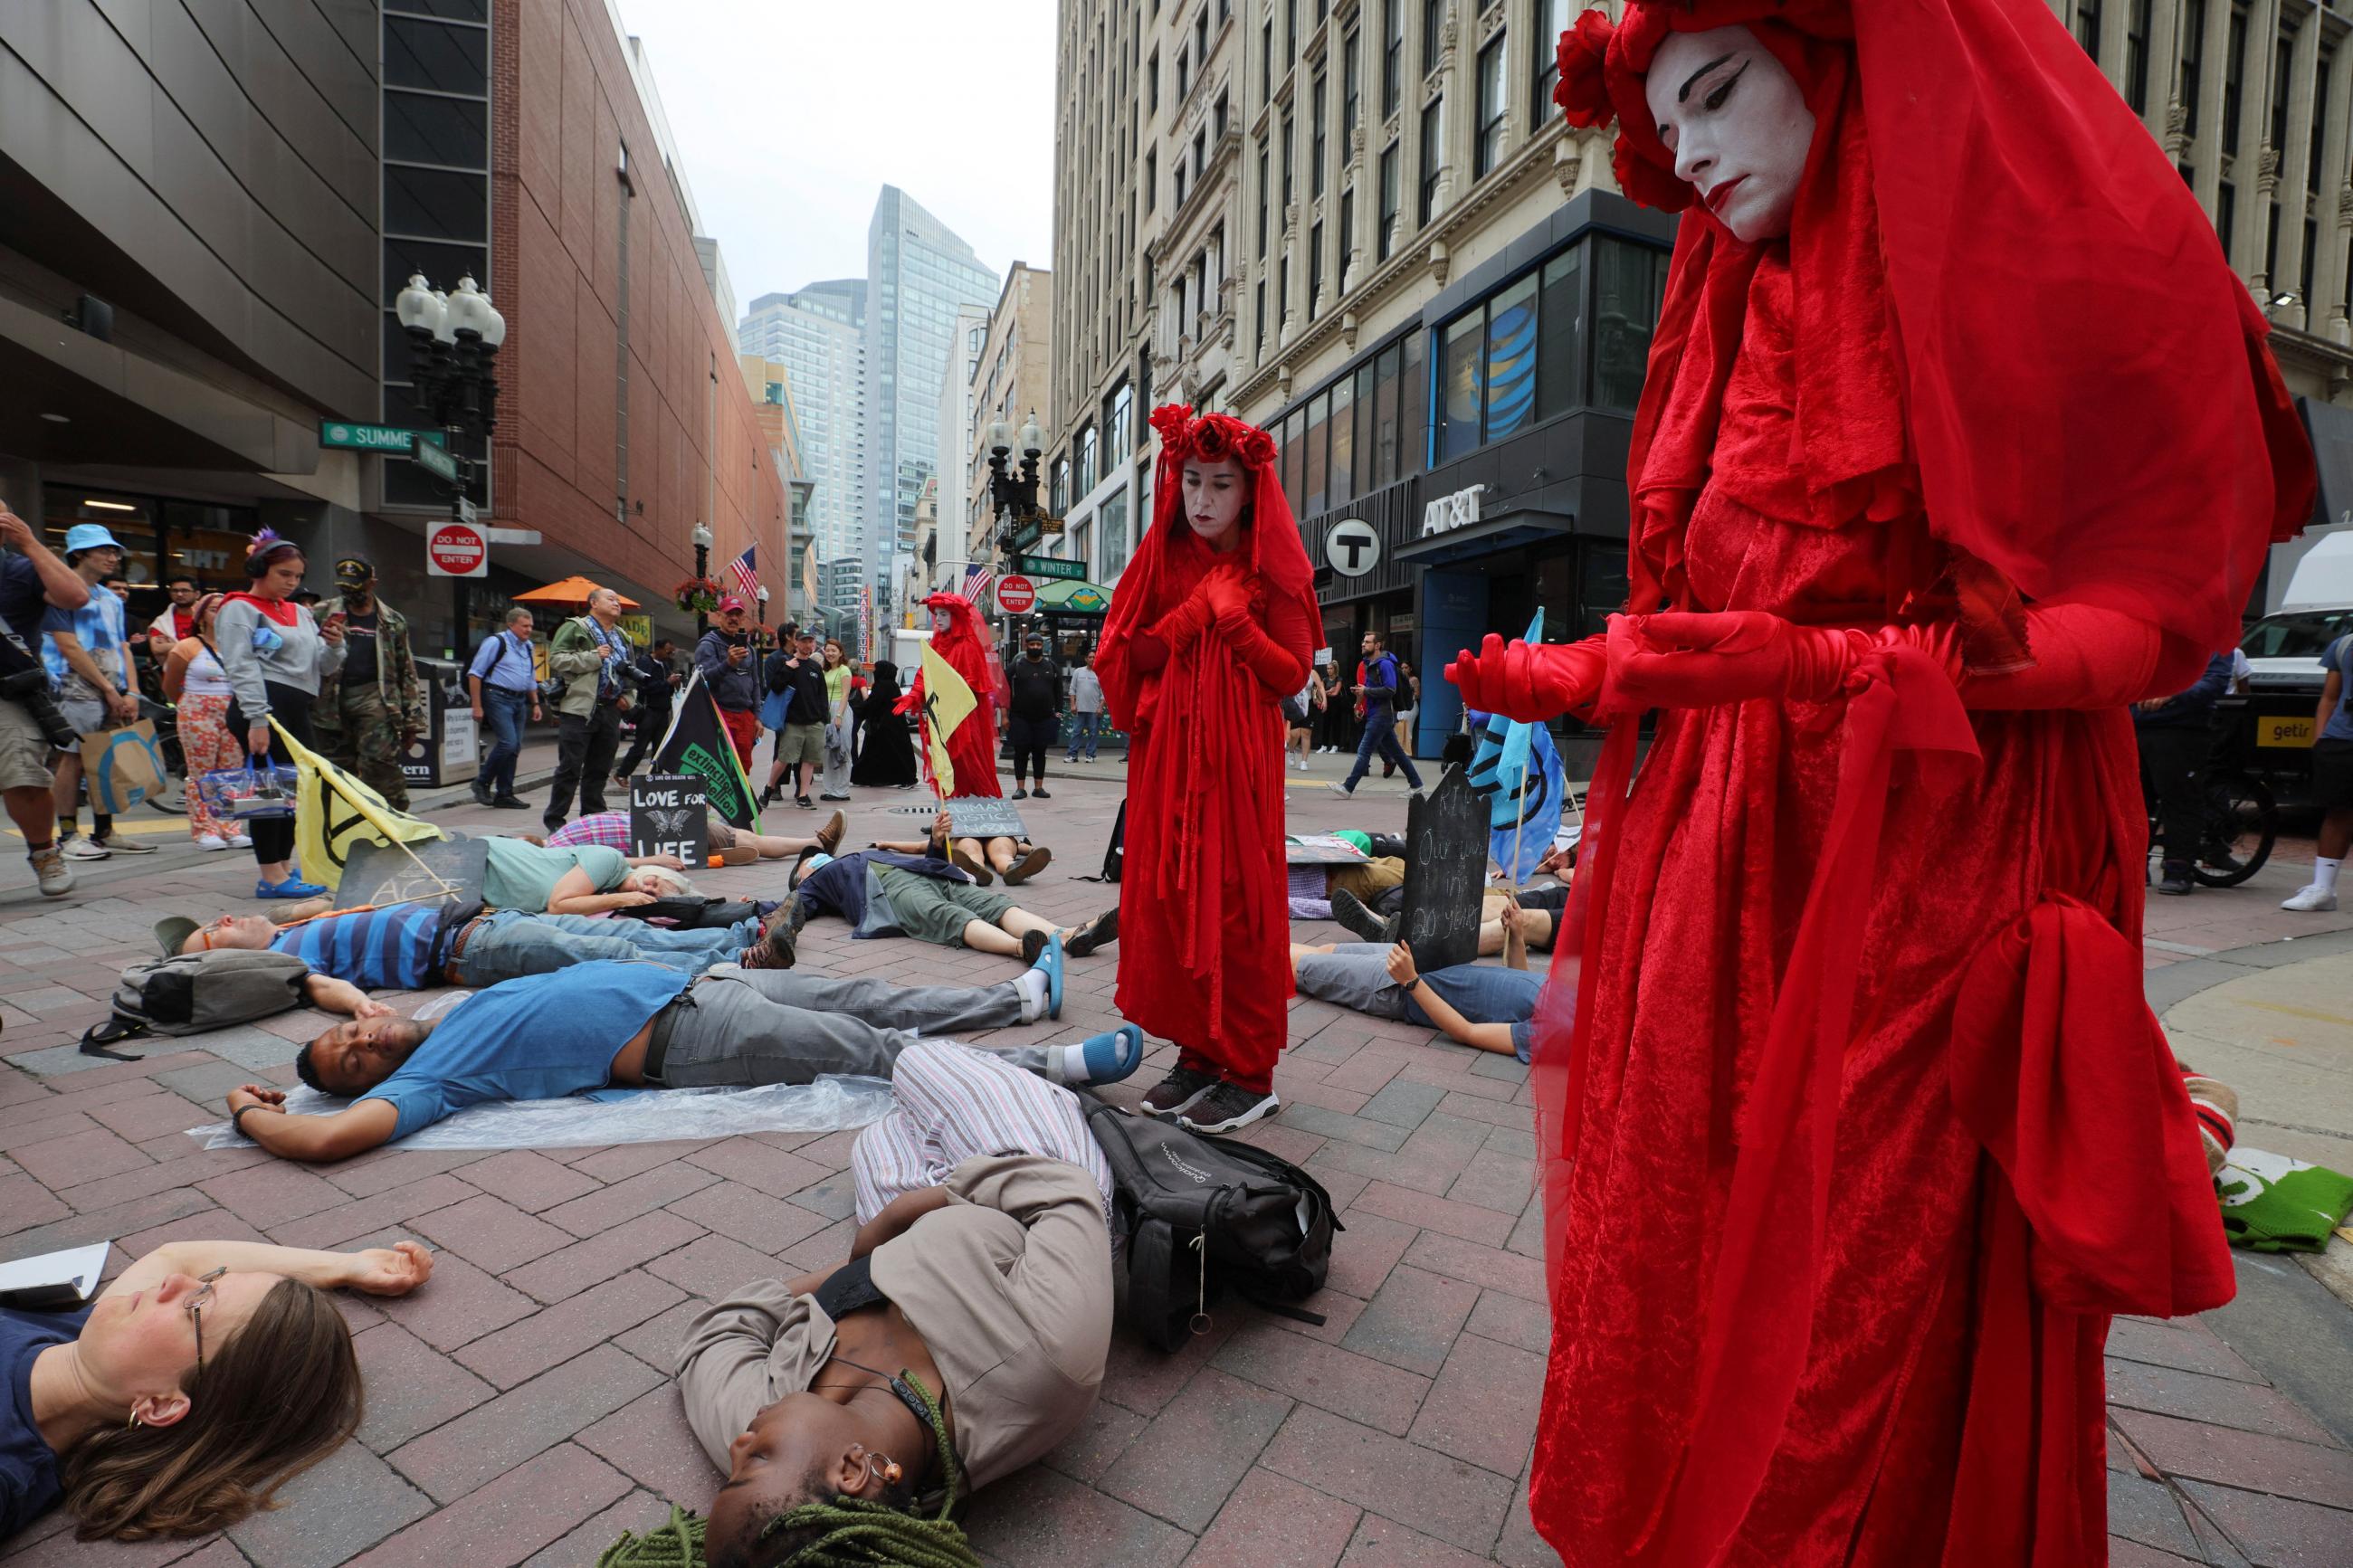 Activists dressed in red cloaks, inspired by the costume design from a "handmaid's tale" demonstrate in the street in front of protestors, who are laying down on pavement, on the streets of Boston, Massachusetts. 